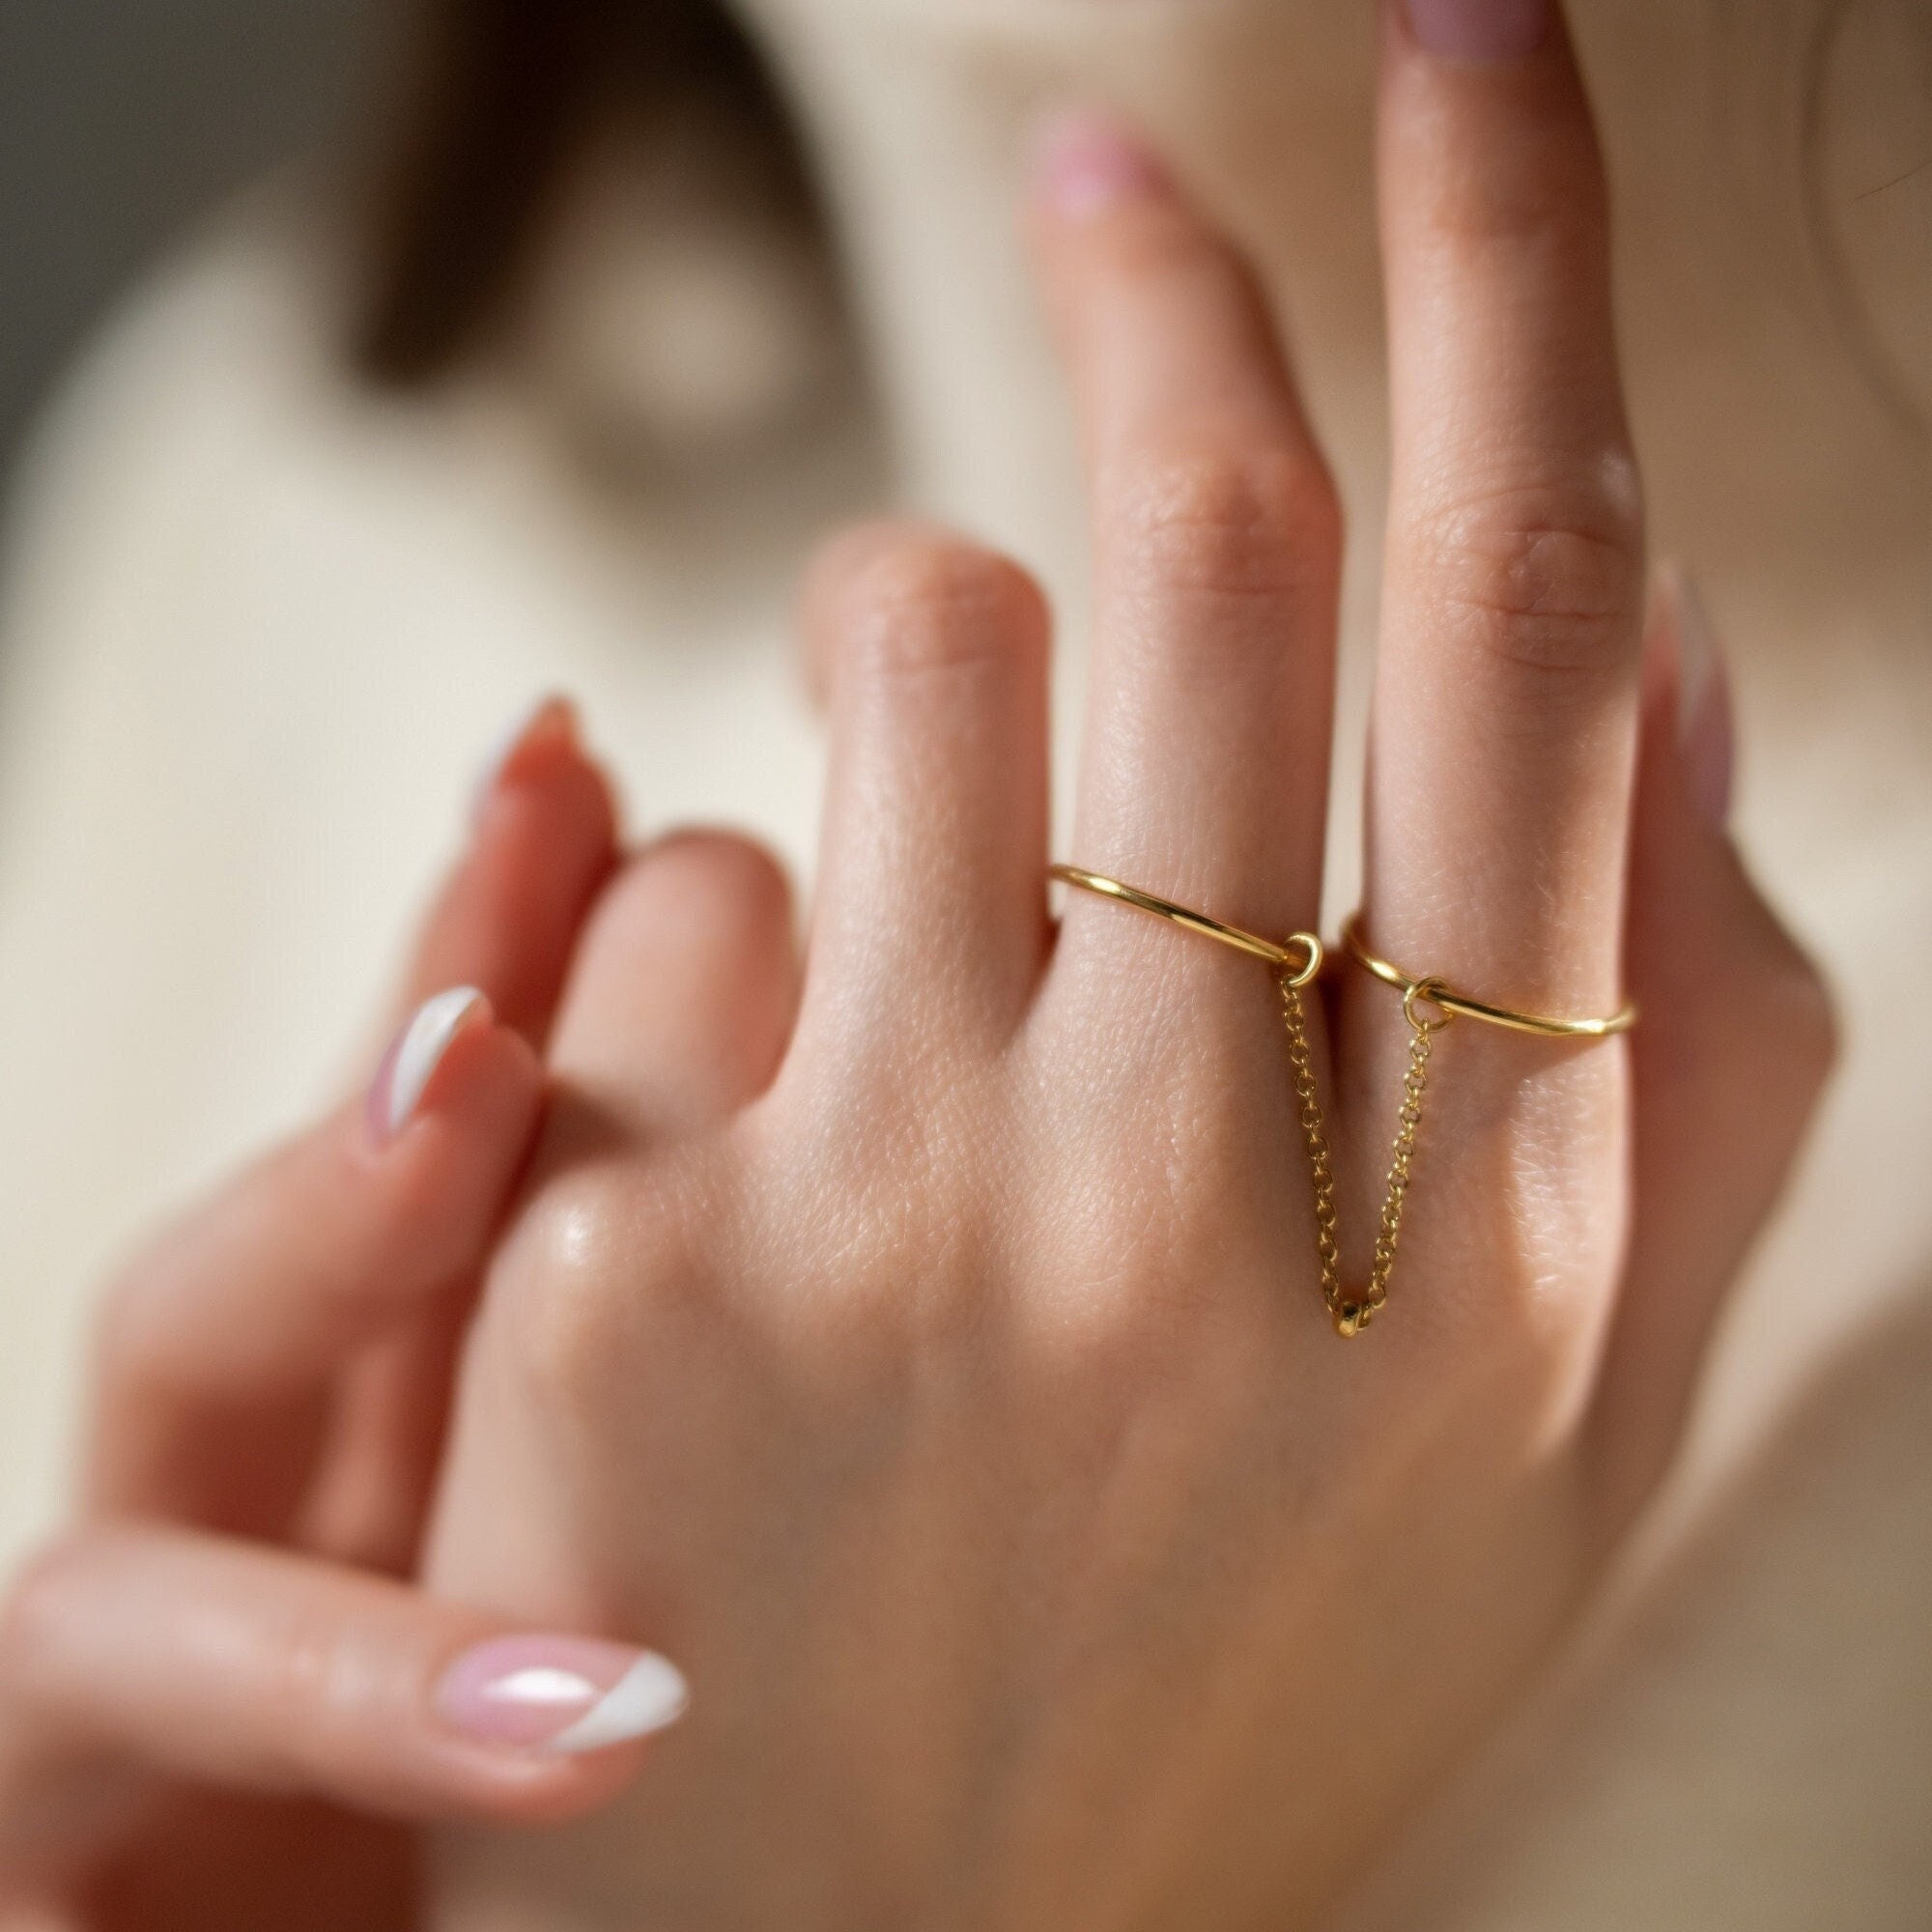 Attractive Gold Finger Ring Designs New Collection//Unique Gold Rings  Designs | Attractive Gold Finger Ring Designs New Collection//Unique Gold  Rings Designs | By Latest Fashion StuffFacebook